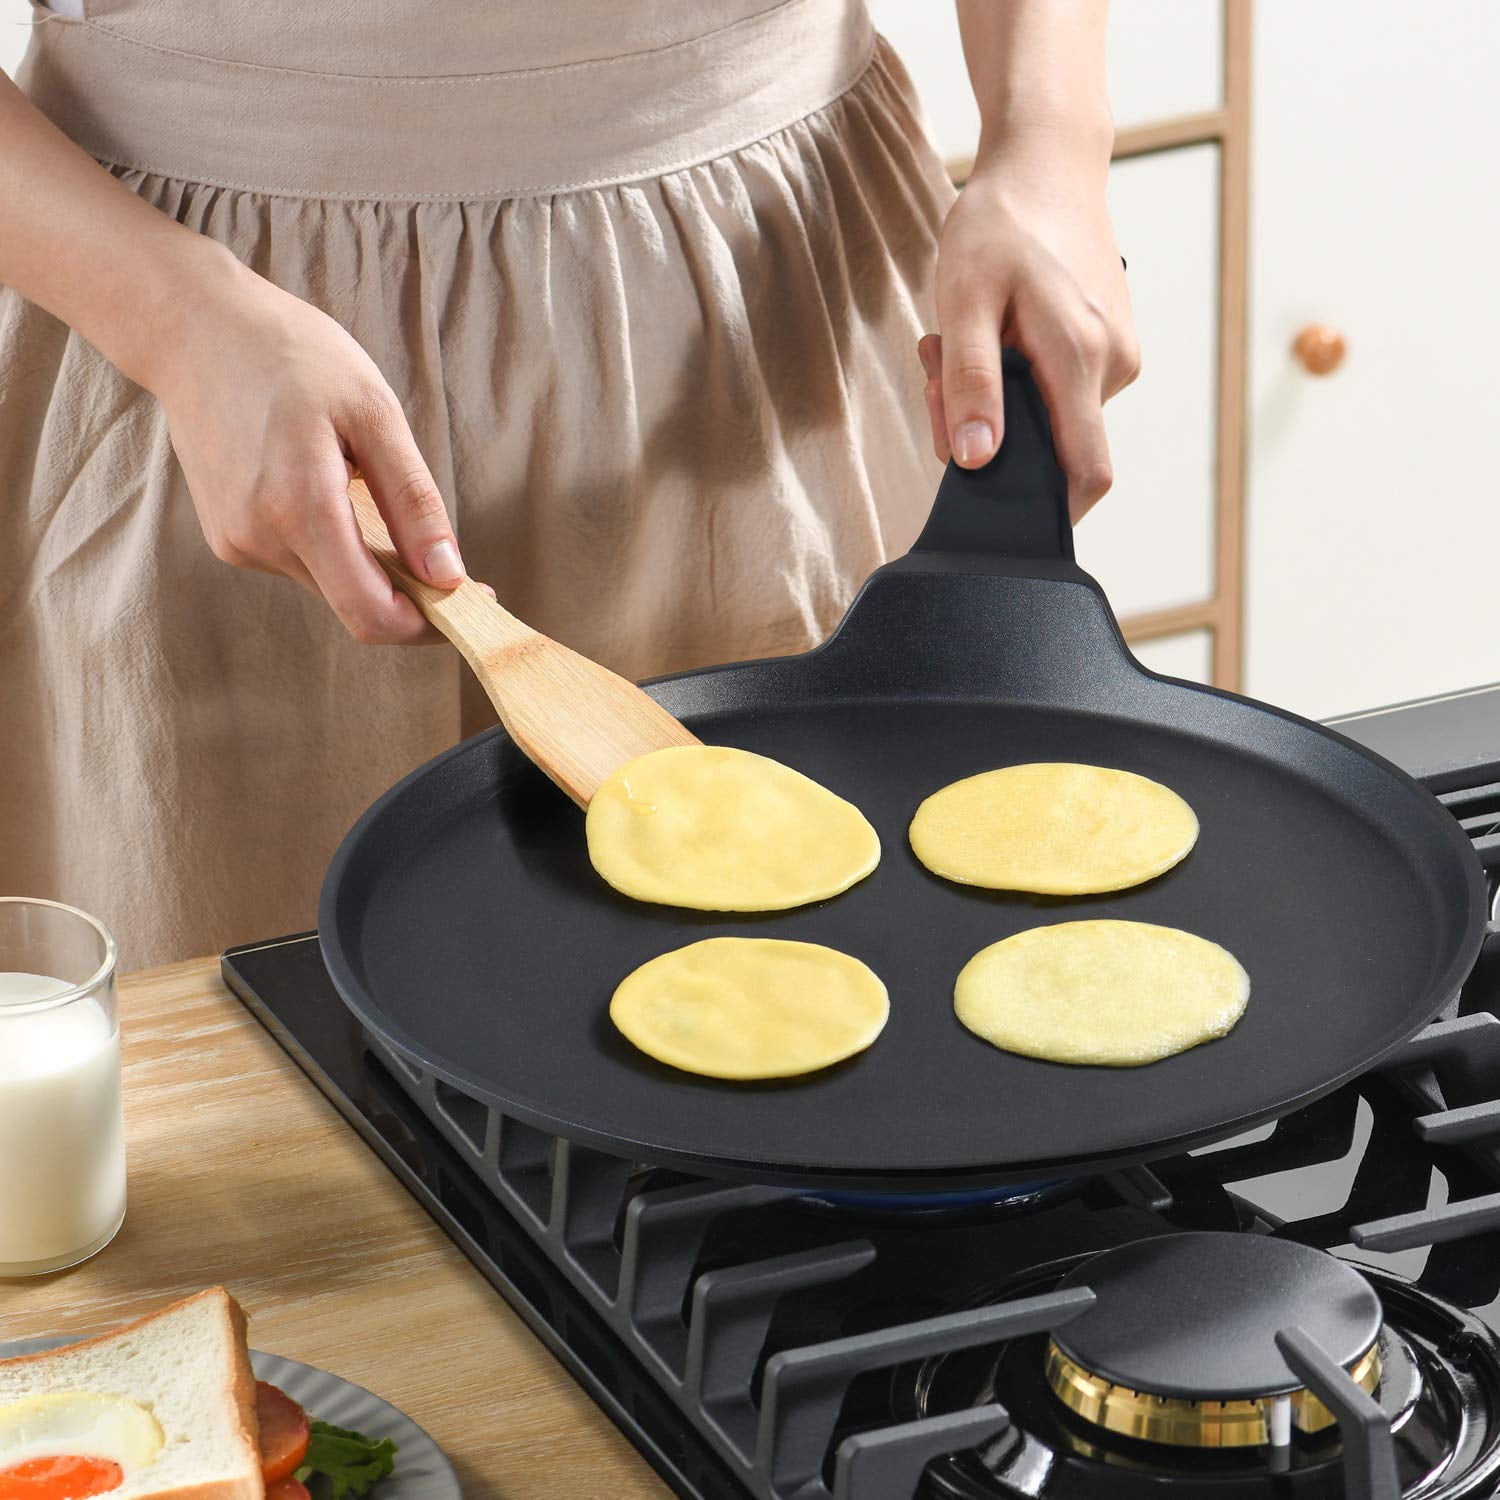 Aluminum Non-stick Dosa Pan Nonstick Dosa Tava Griddle Dosa Pan Round  Griddle Crepe Pancake Easy To cook Indian style Cookware with handle Pizza  Crepe